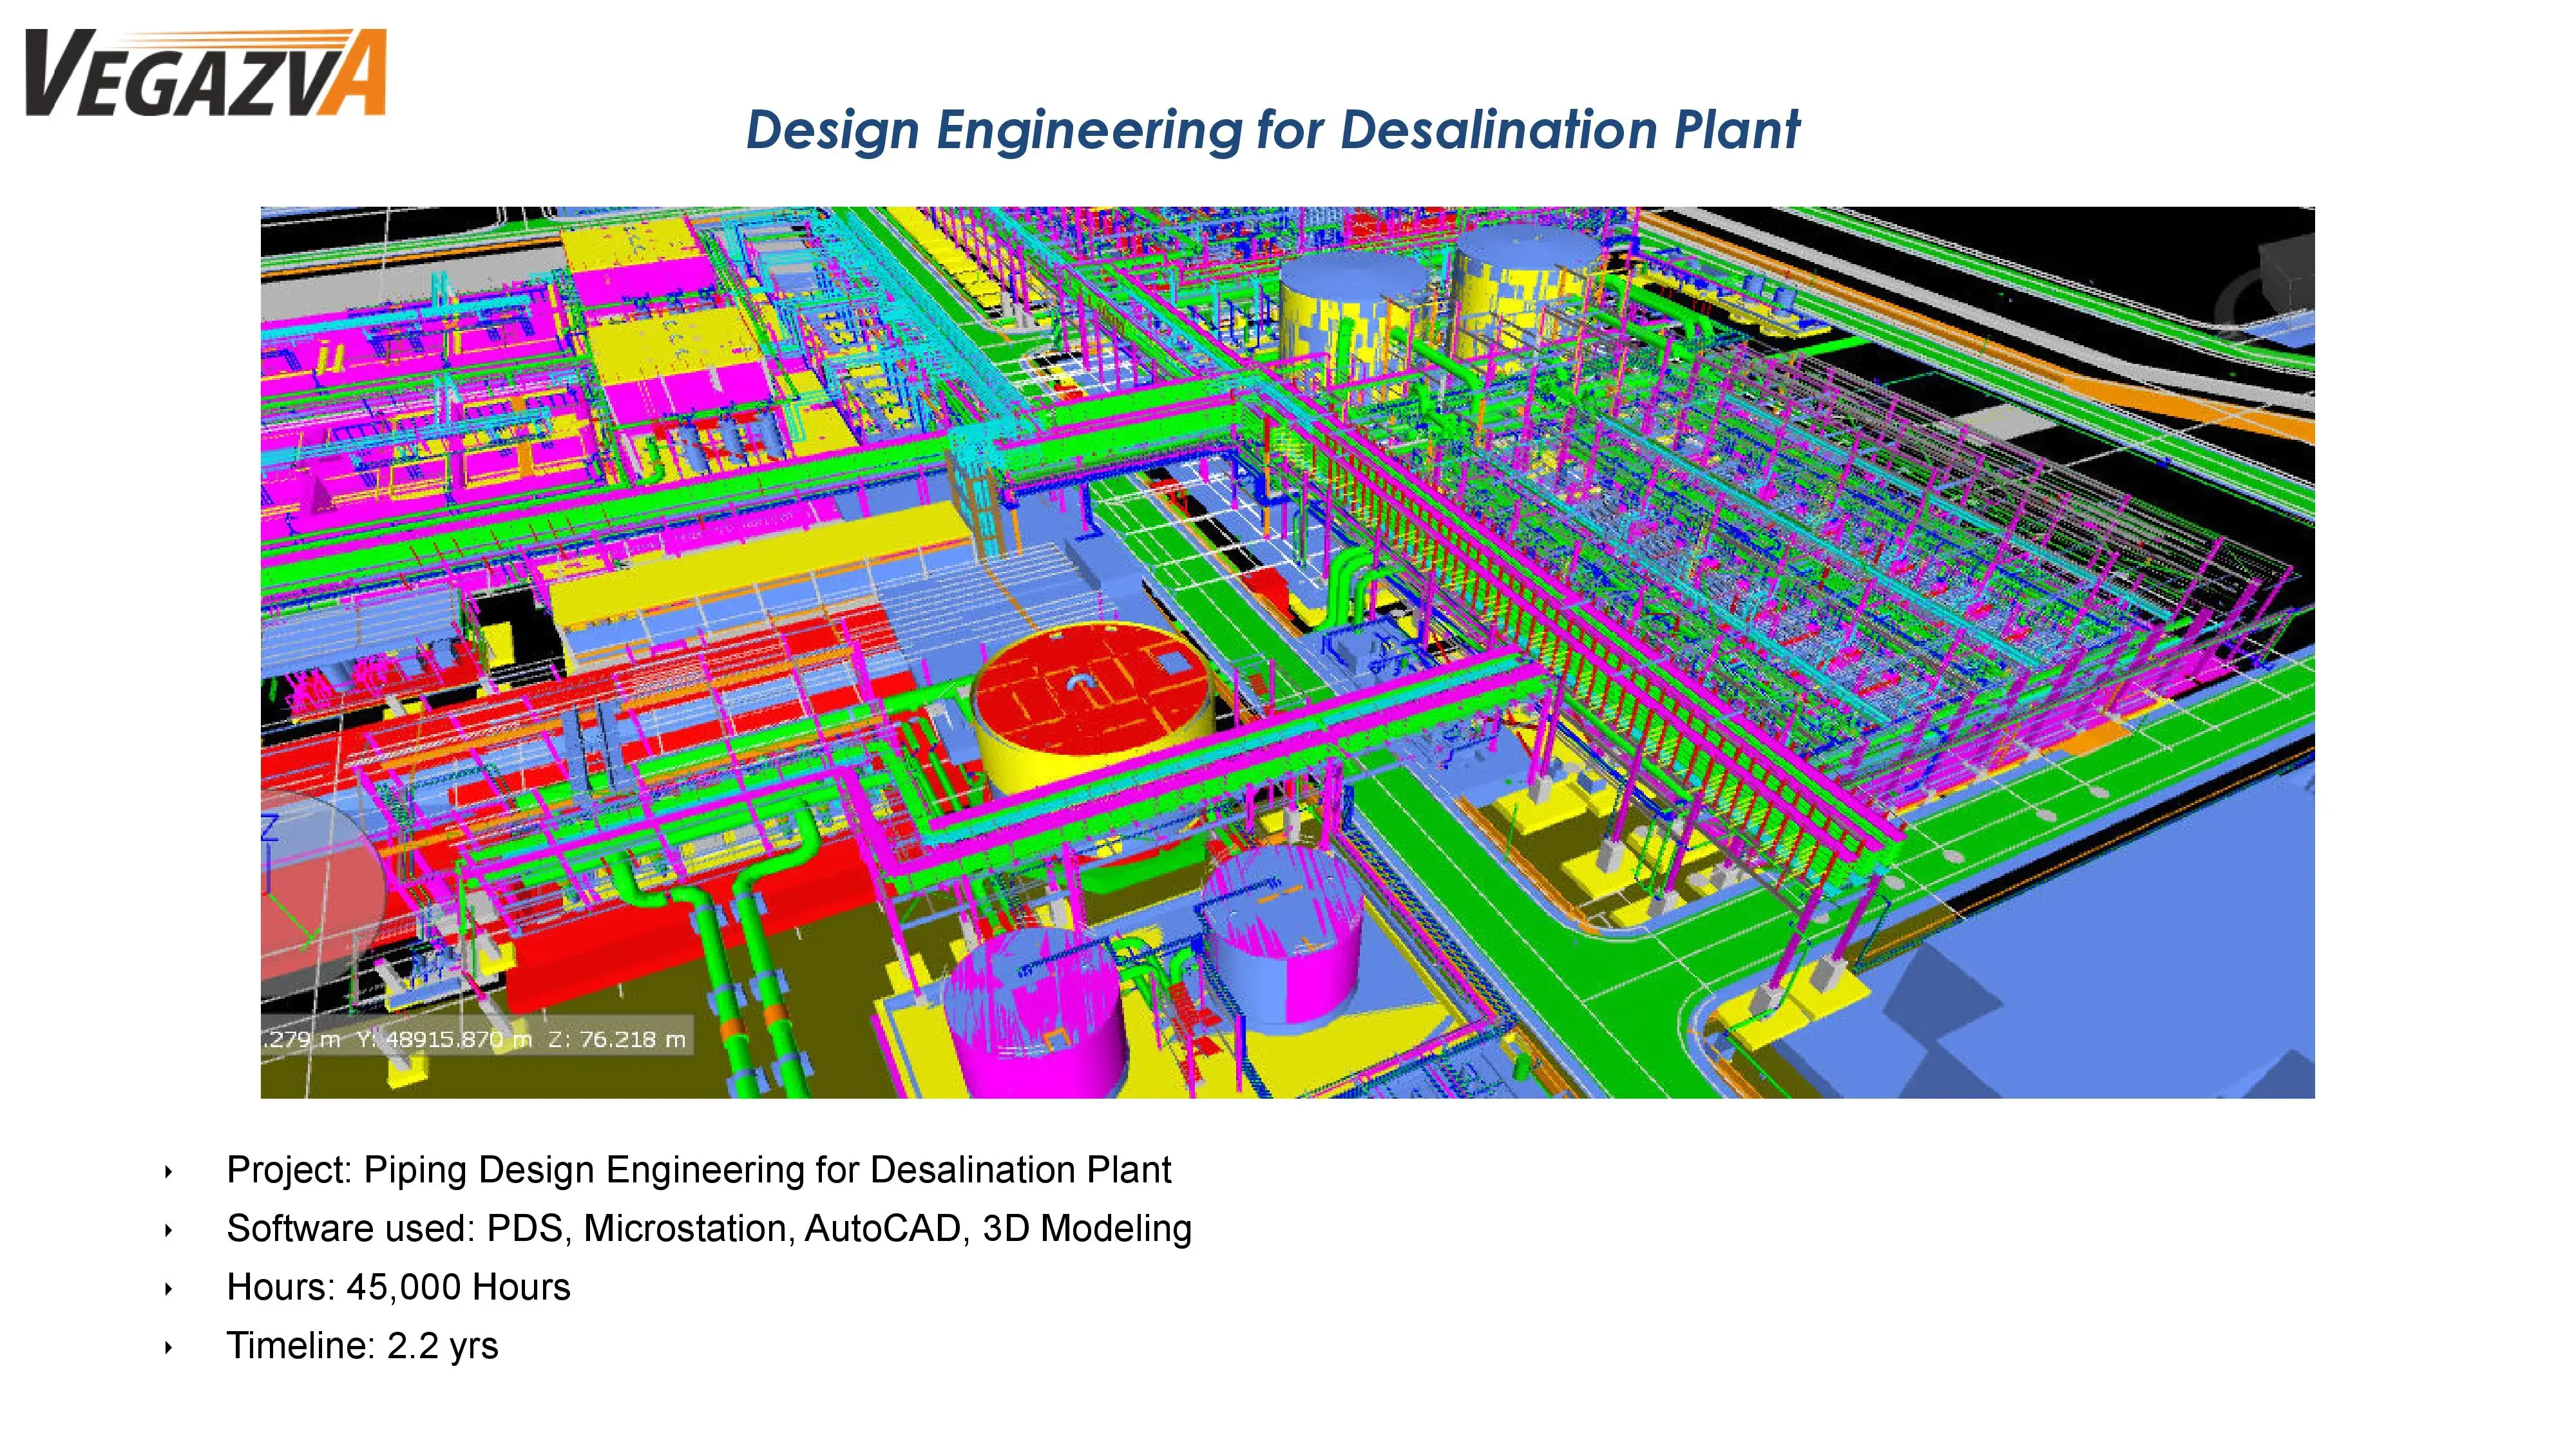 Signature Project - Design Engineering for Desalination Plant